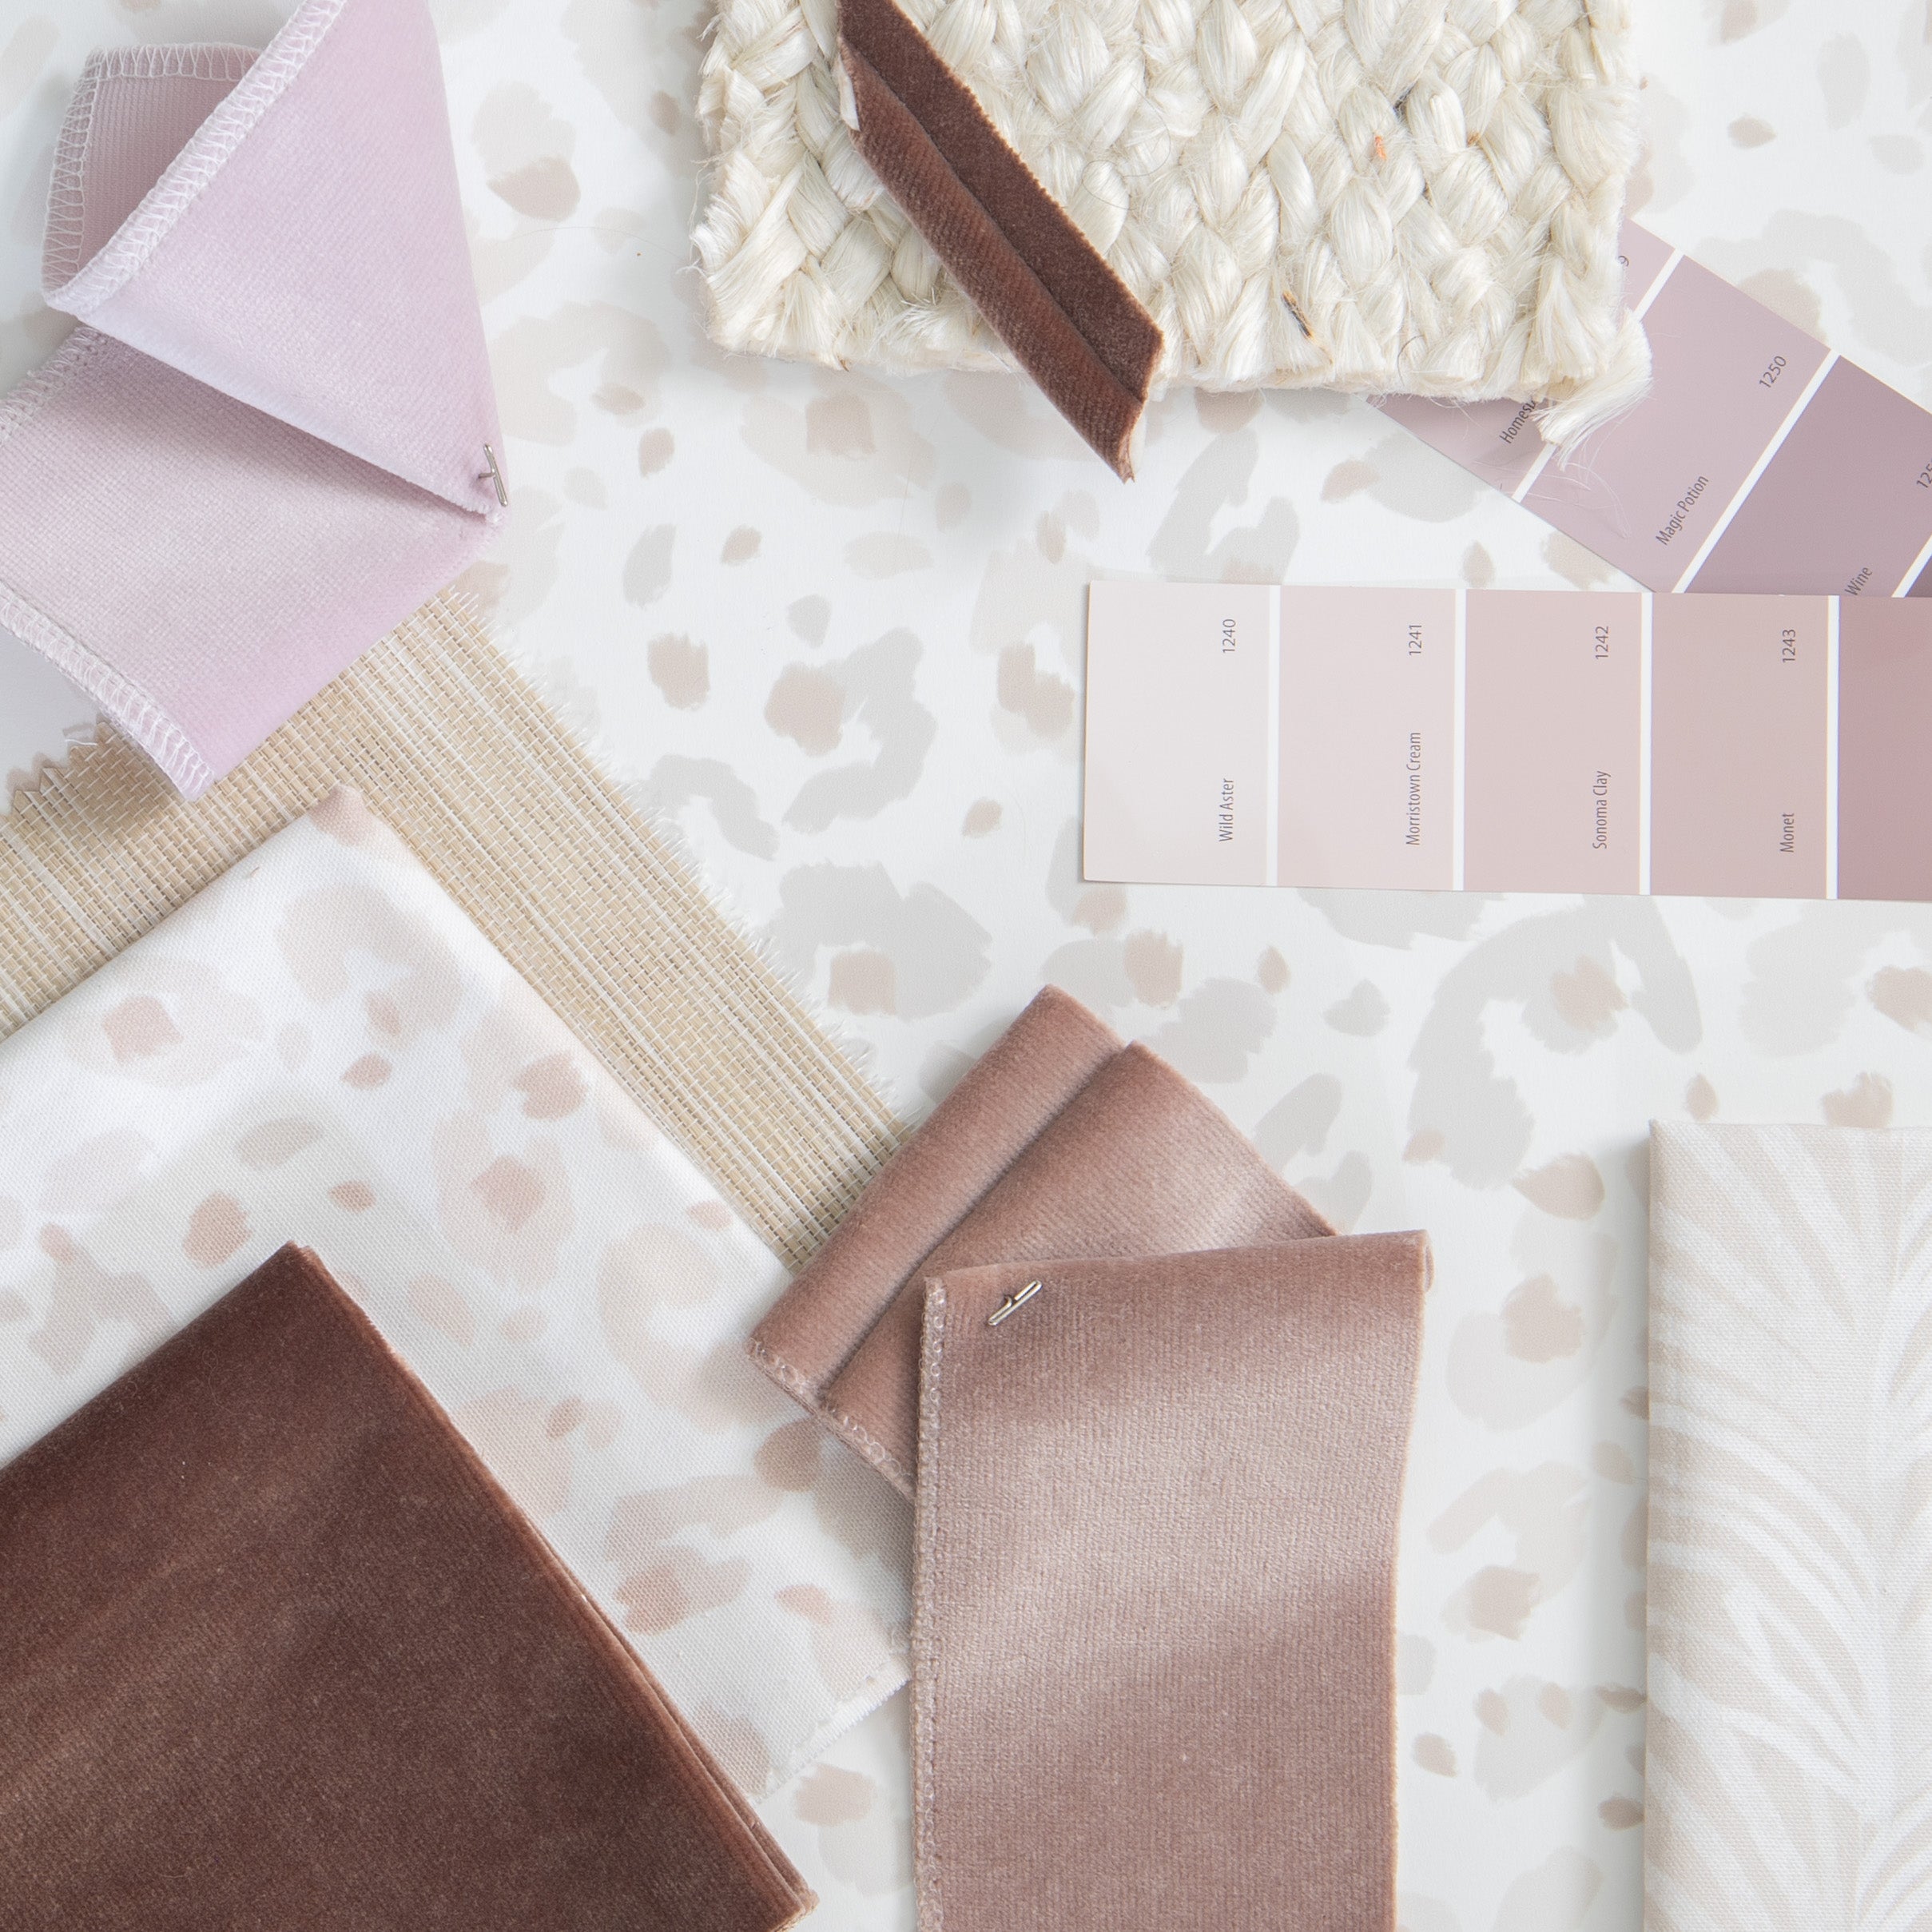 Interior design moodboard and fabric inspirations with Lilac Velvet Swatch, Mauve Velvet Swatch, Pink Velvet Swatch, and Beige Animal Print Swatch